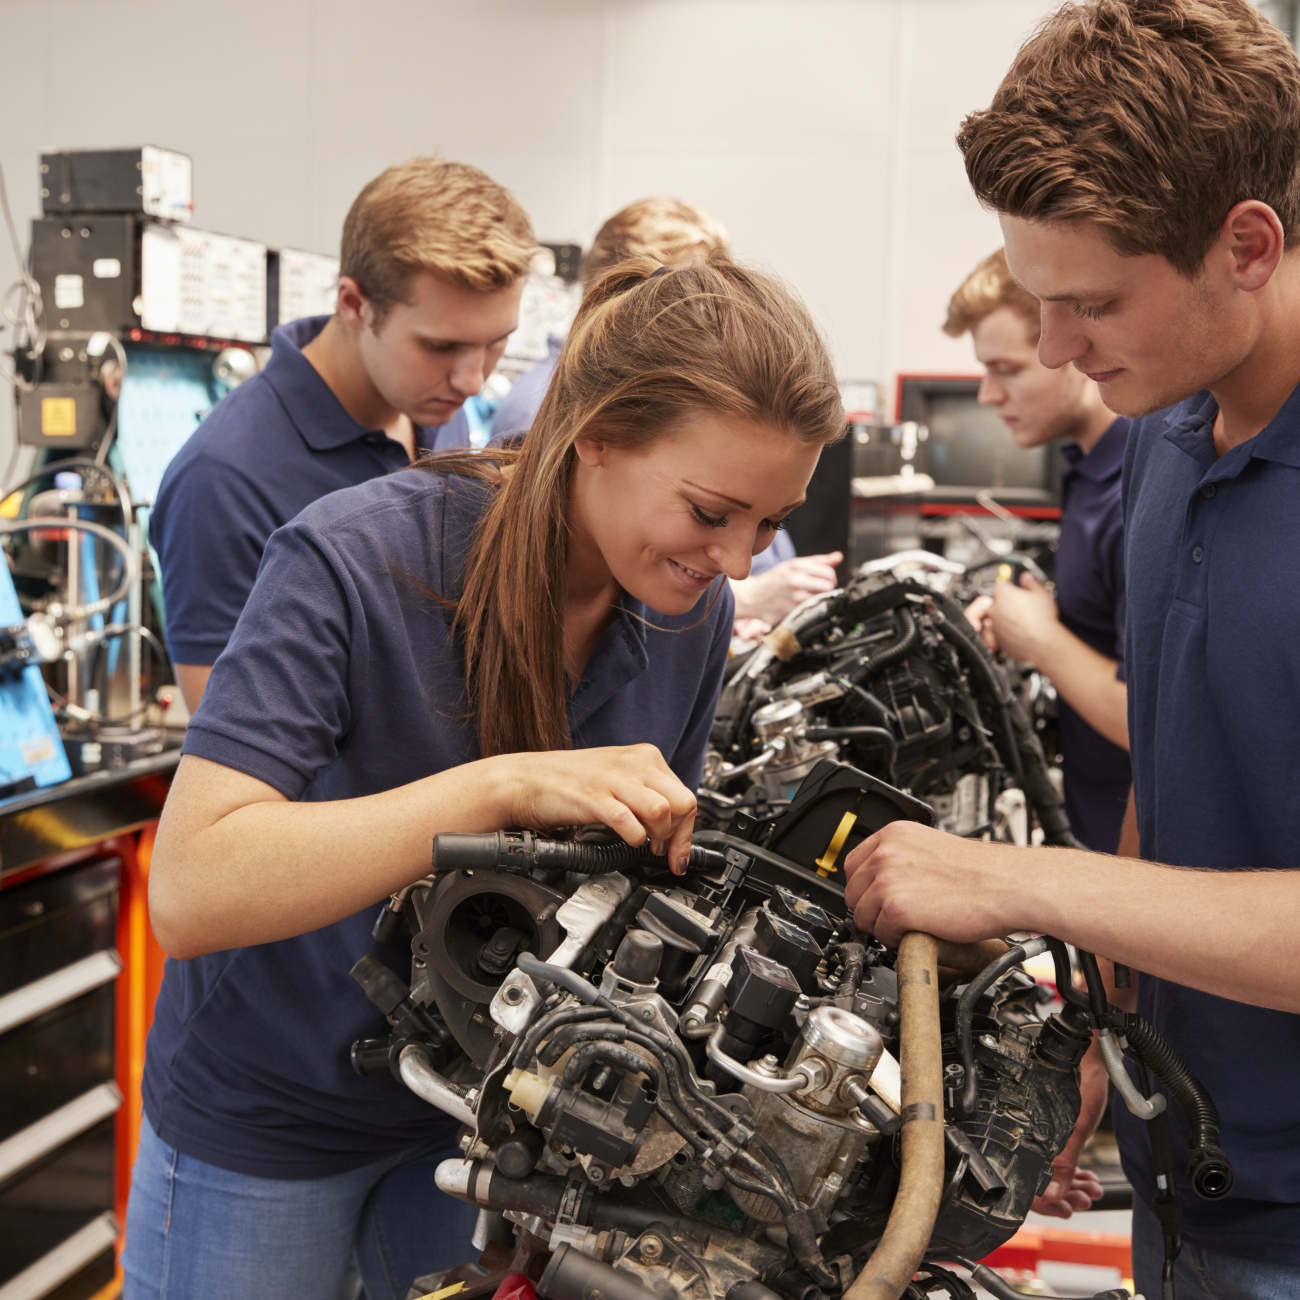 Two students looking at an engine